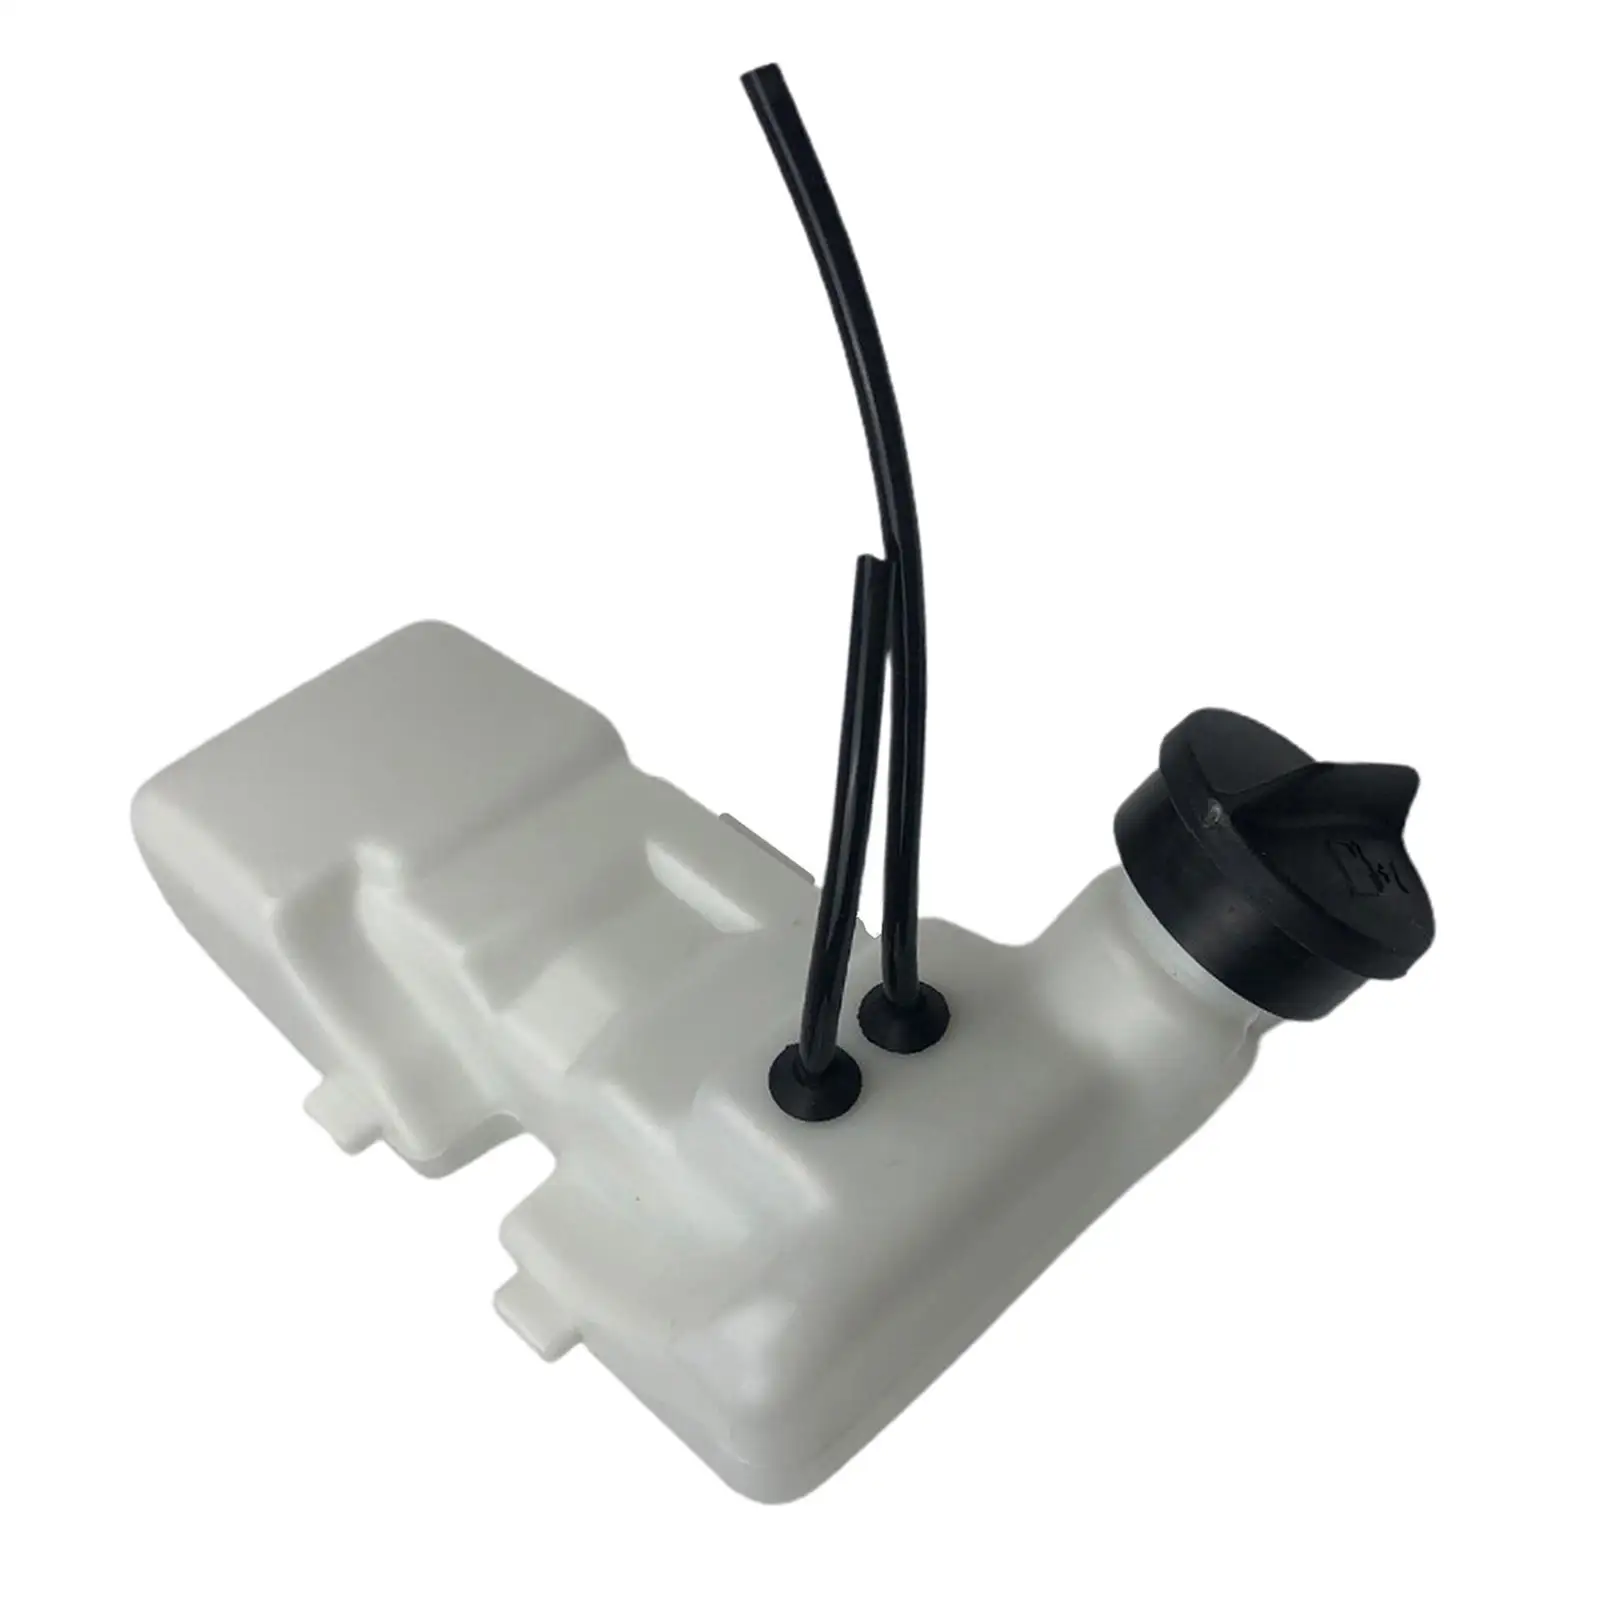 New Replacement Gas Fuel Tank with Cap Assembly for Stihl FS80R FS80 FS75 FS76 FS74 FS72 FS85 KM85 HT75 Trimmer Parts